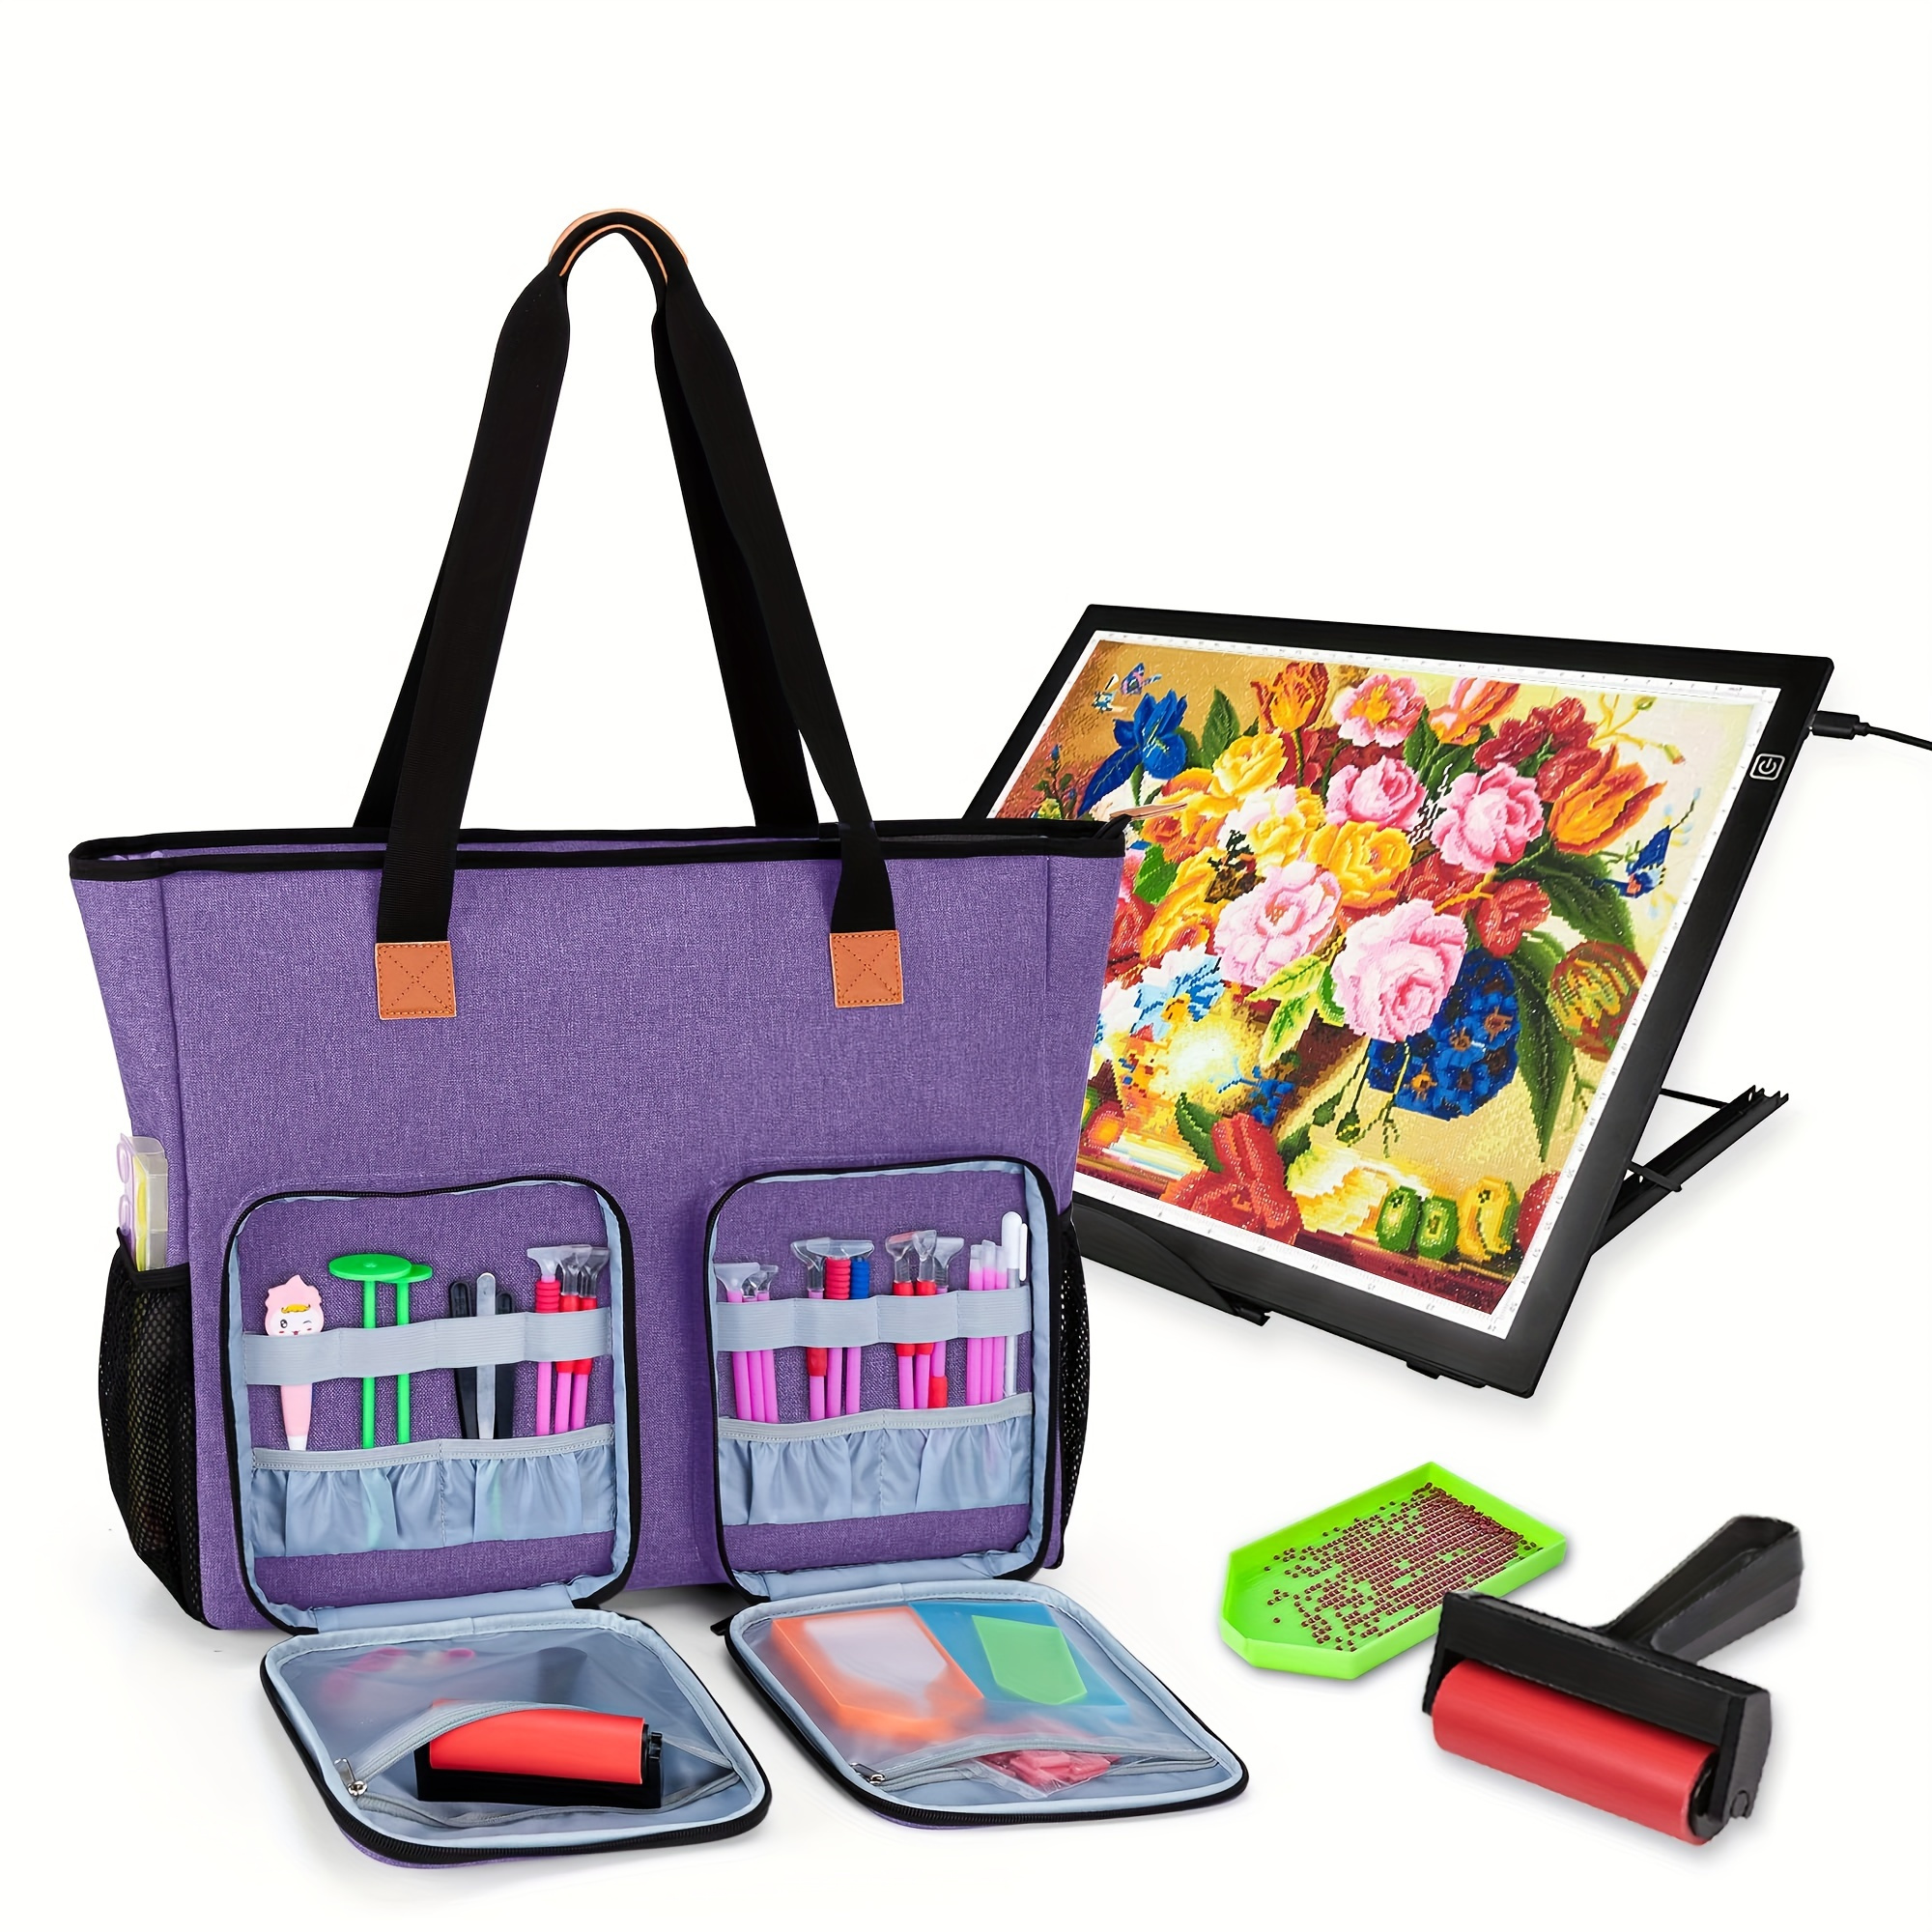 

Carrying Case For Diamond Art Painting Accessories And A3, A4 Light Pad, Diamond Art Painting Bag For A3 And B3 Light Box